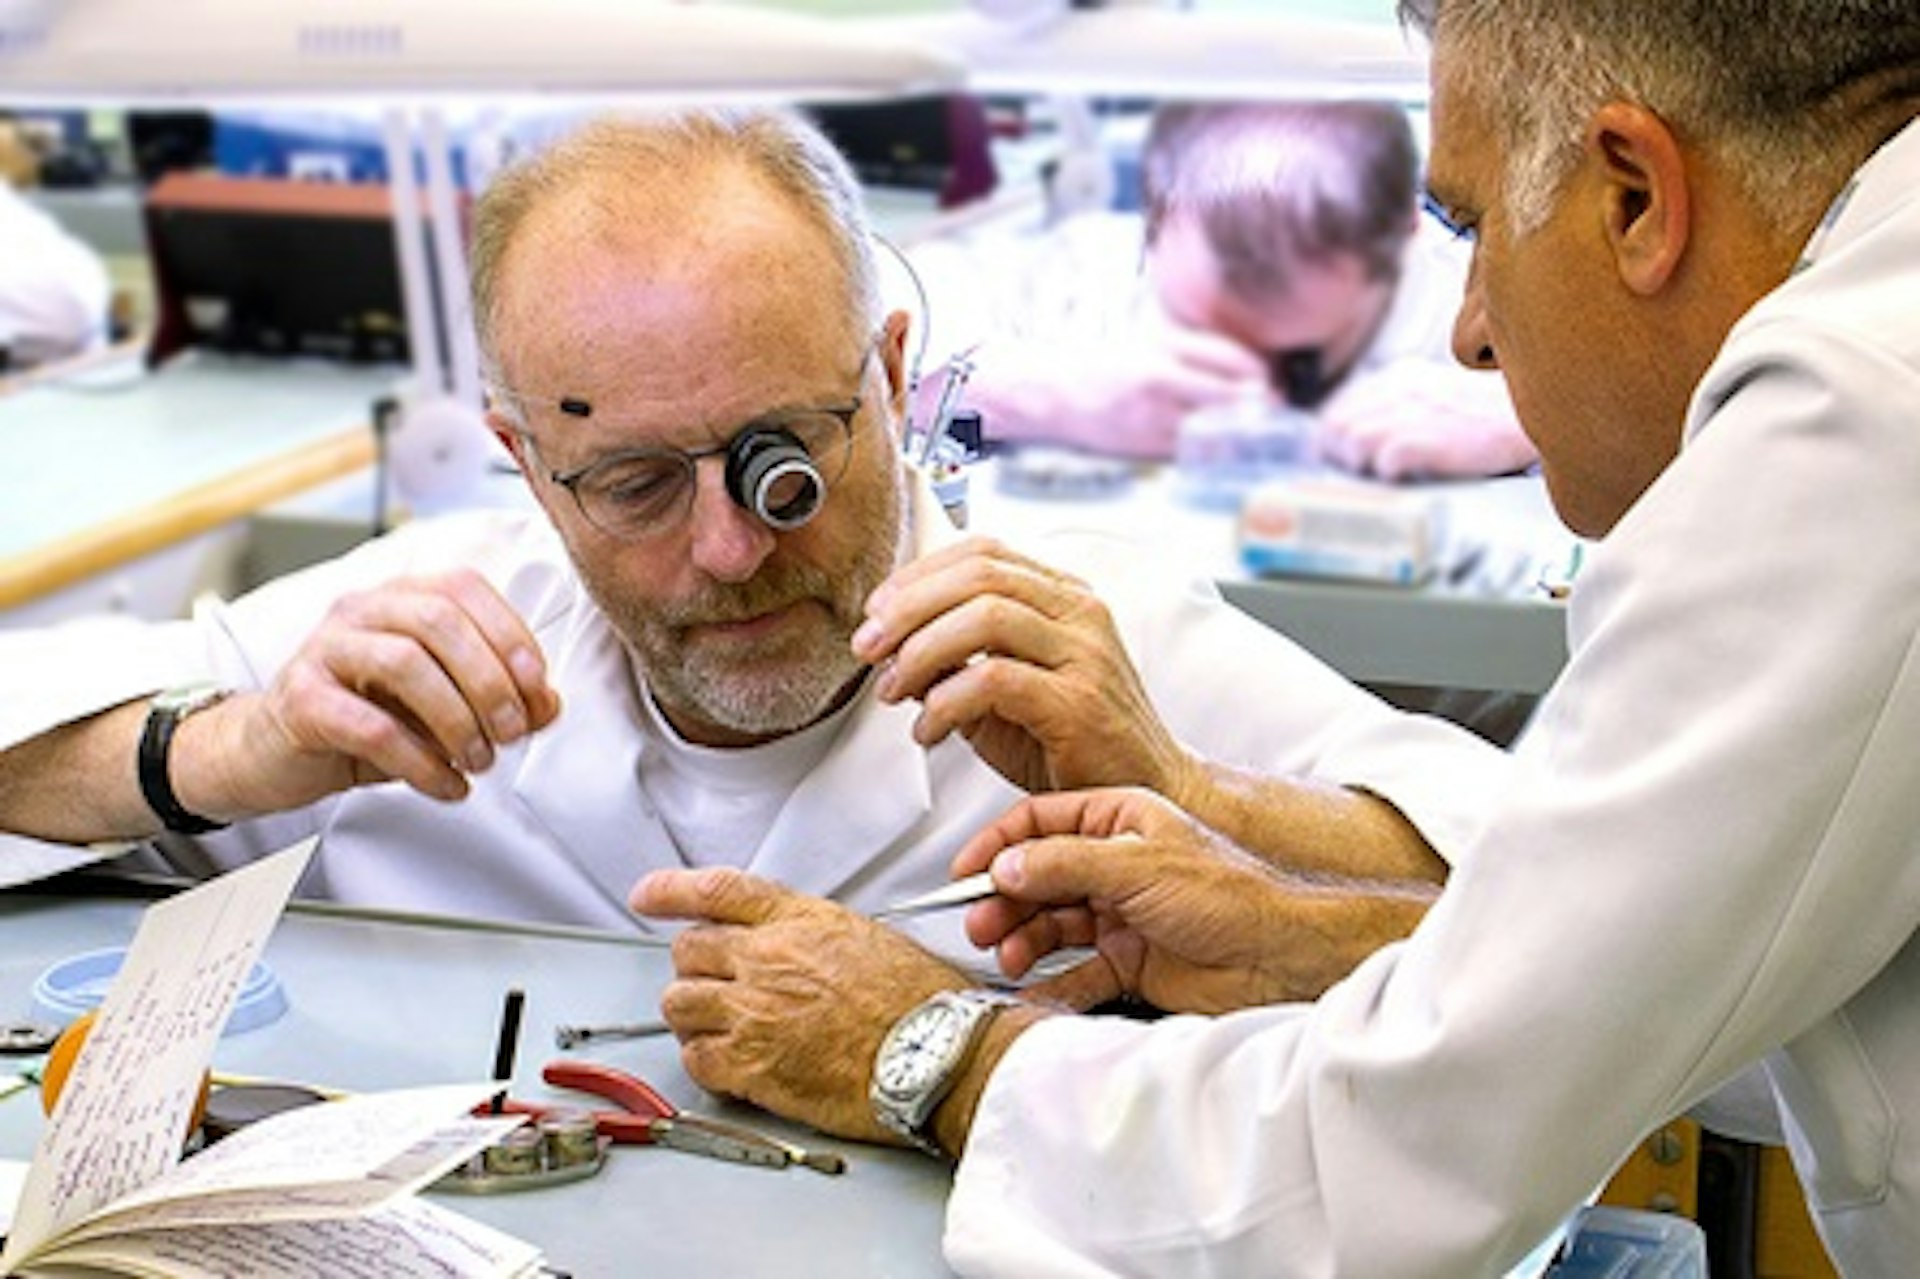 Build Your Own Watch and Learn the History of Watchmaking at The British Horological Institute with Overnight Stay